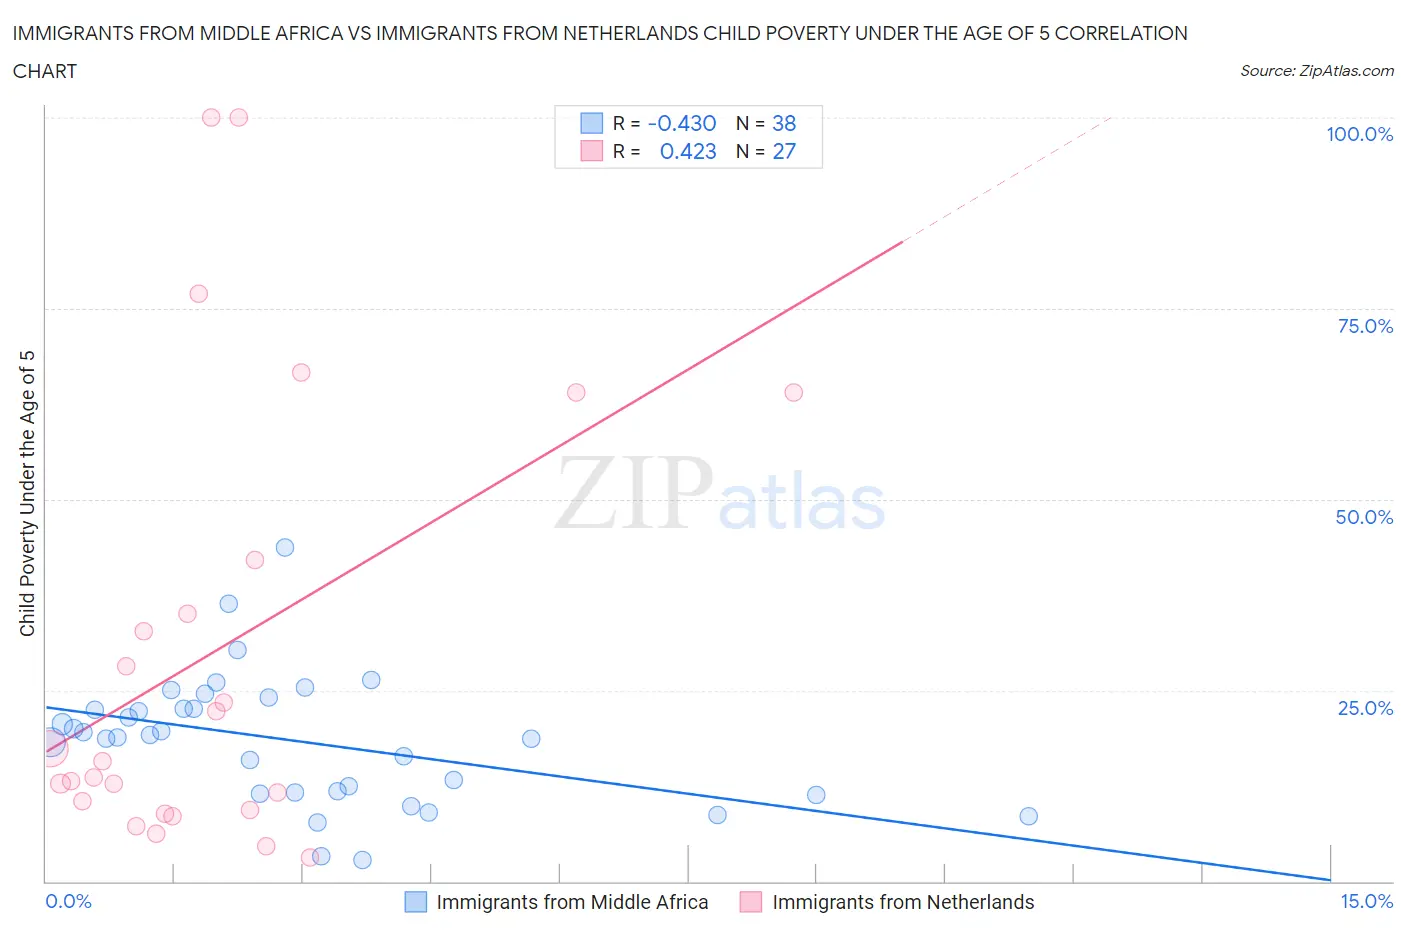 Immigrants from Middle Africa vs Immigrants from Netherlands Child Poverty Under the Age of 5